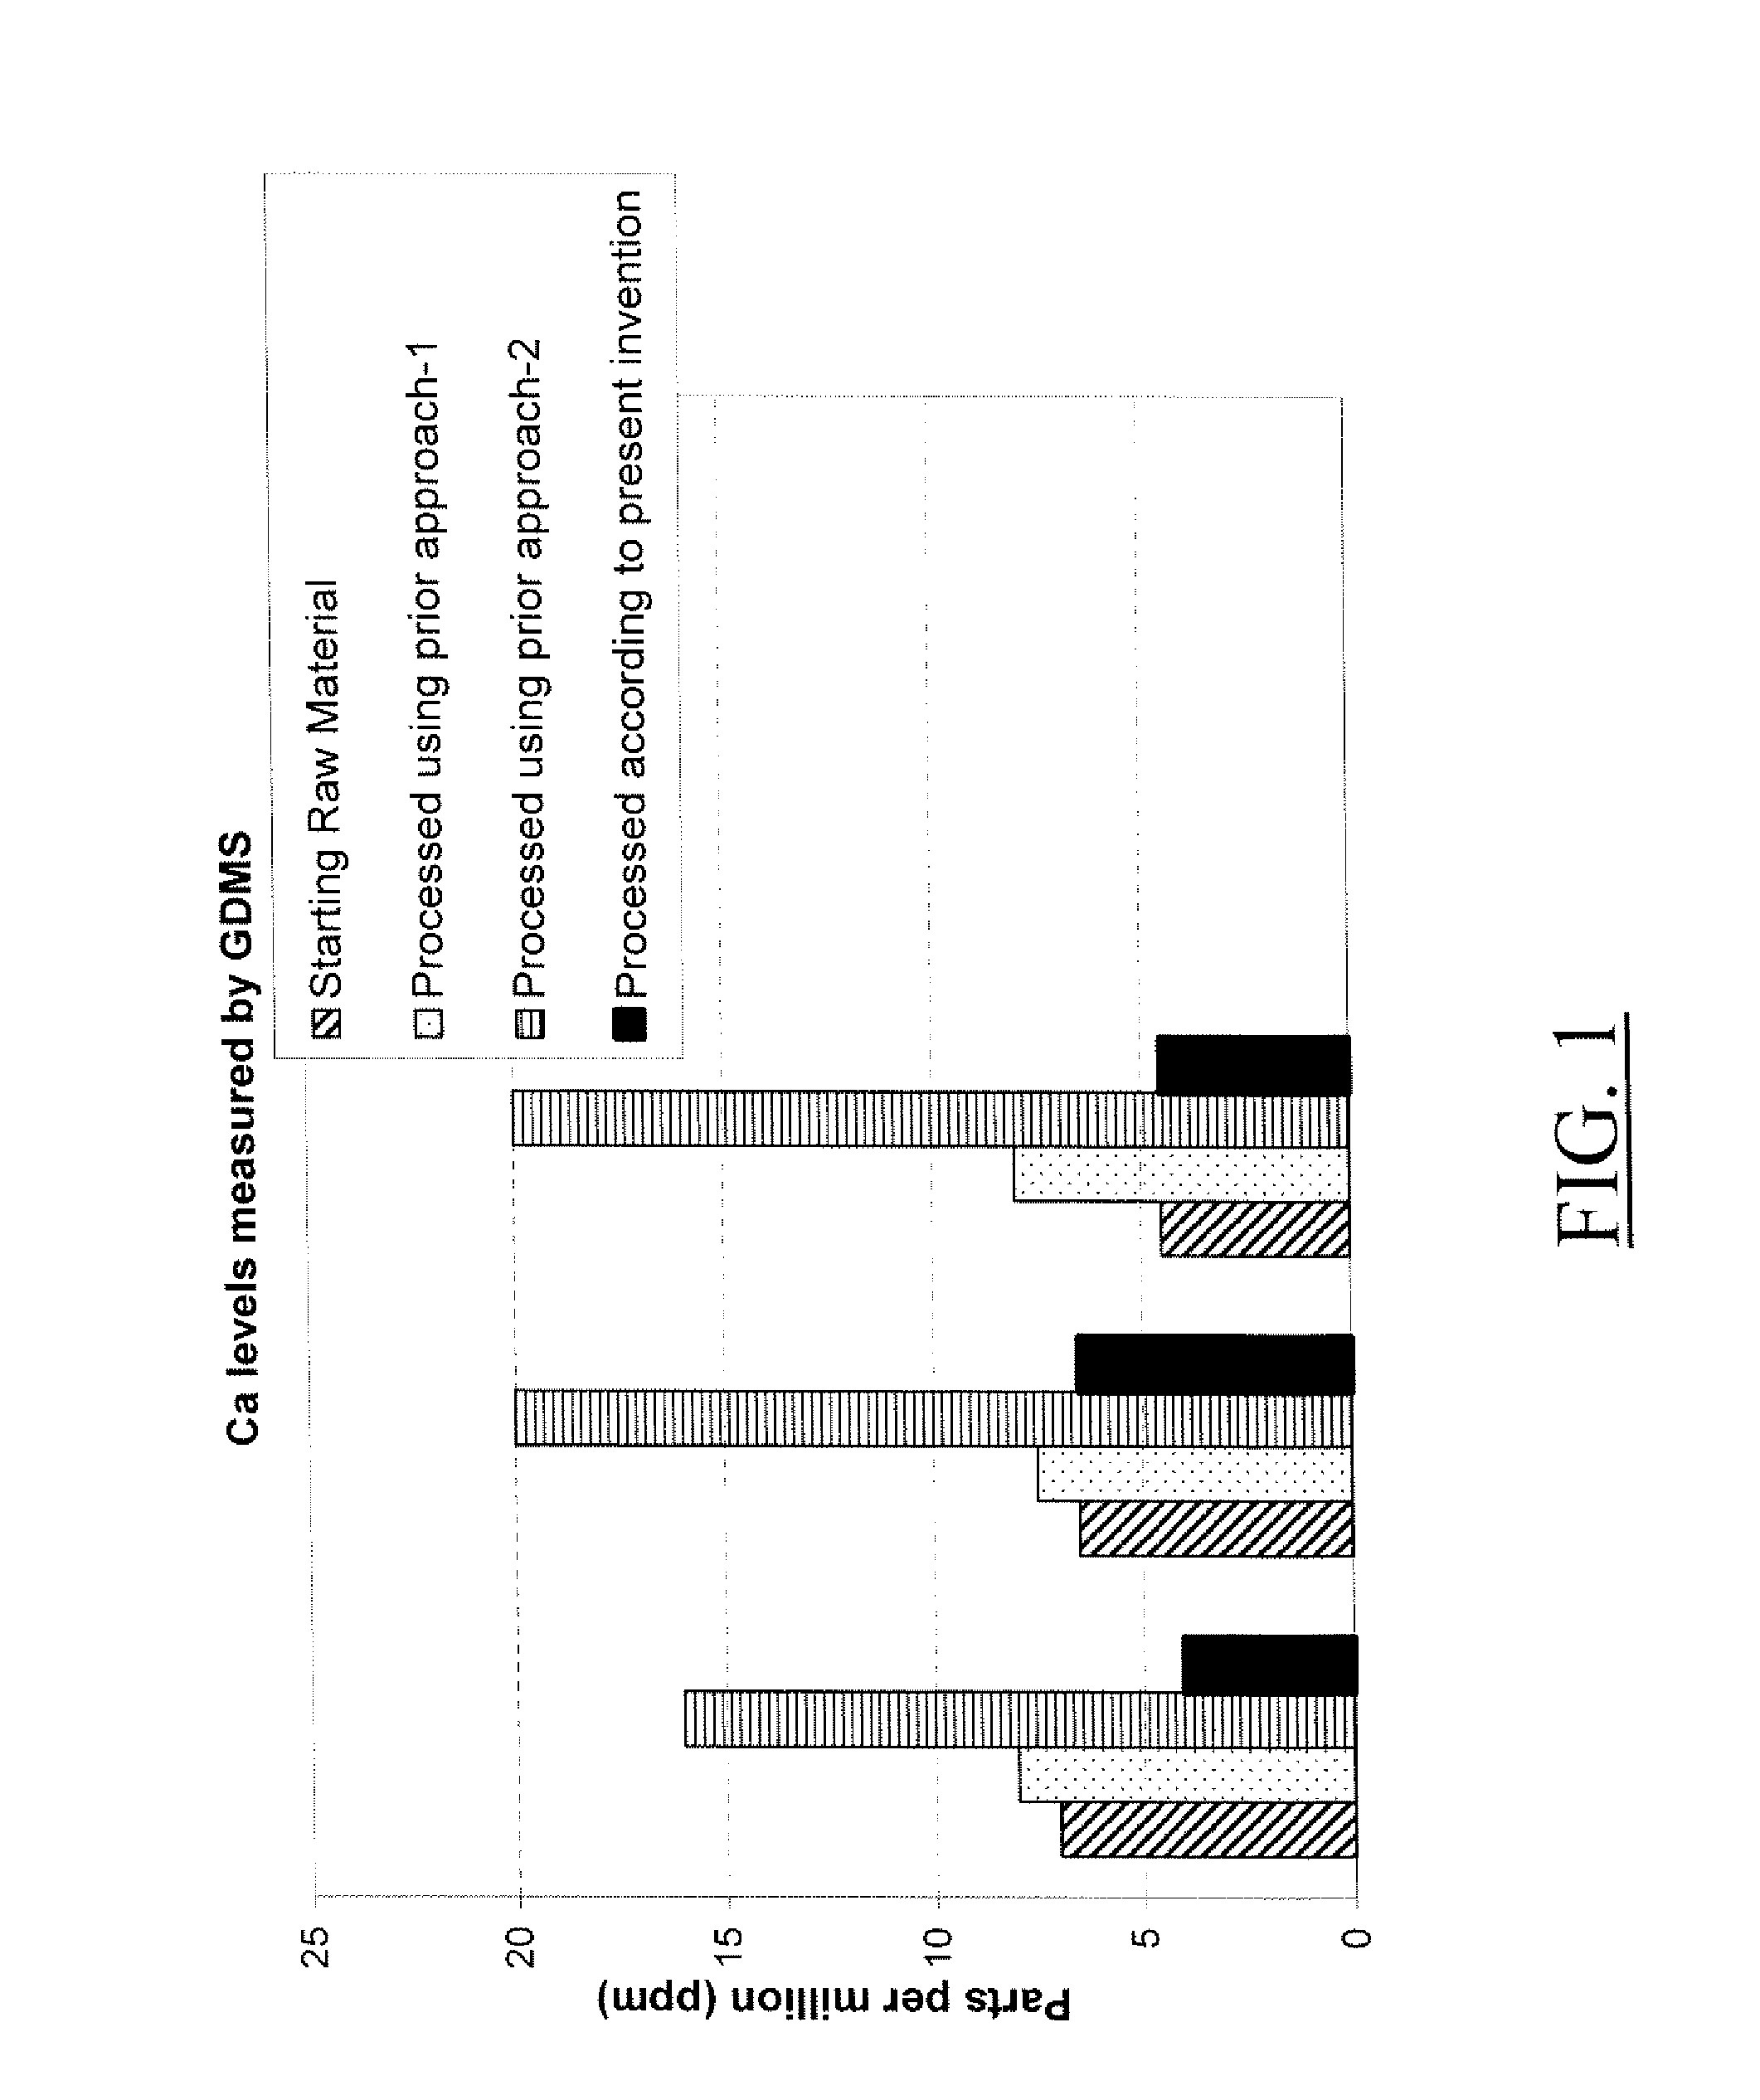 Method of making high purity polycrystalline aluminum oxynitride bodies useful in semiconductor process chambers